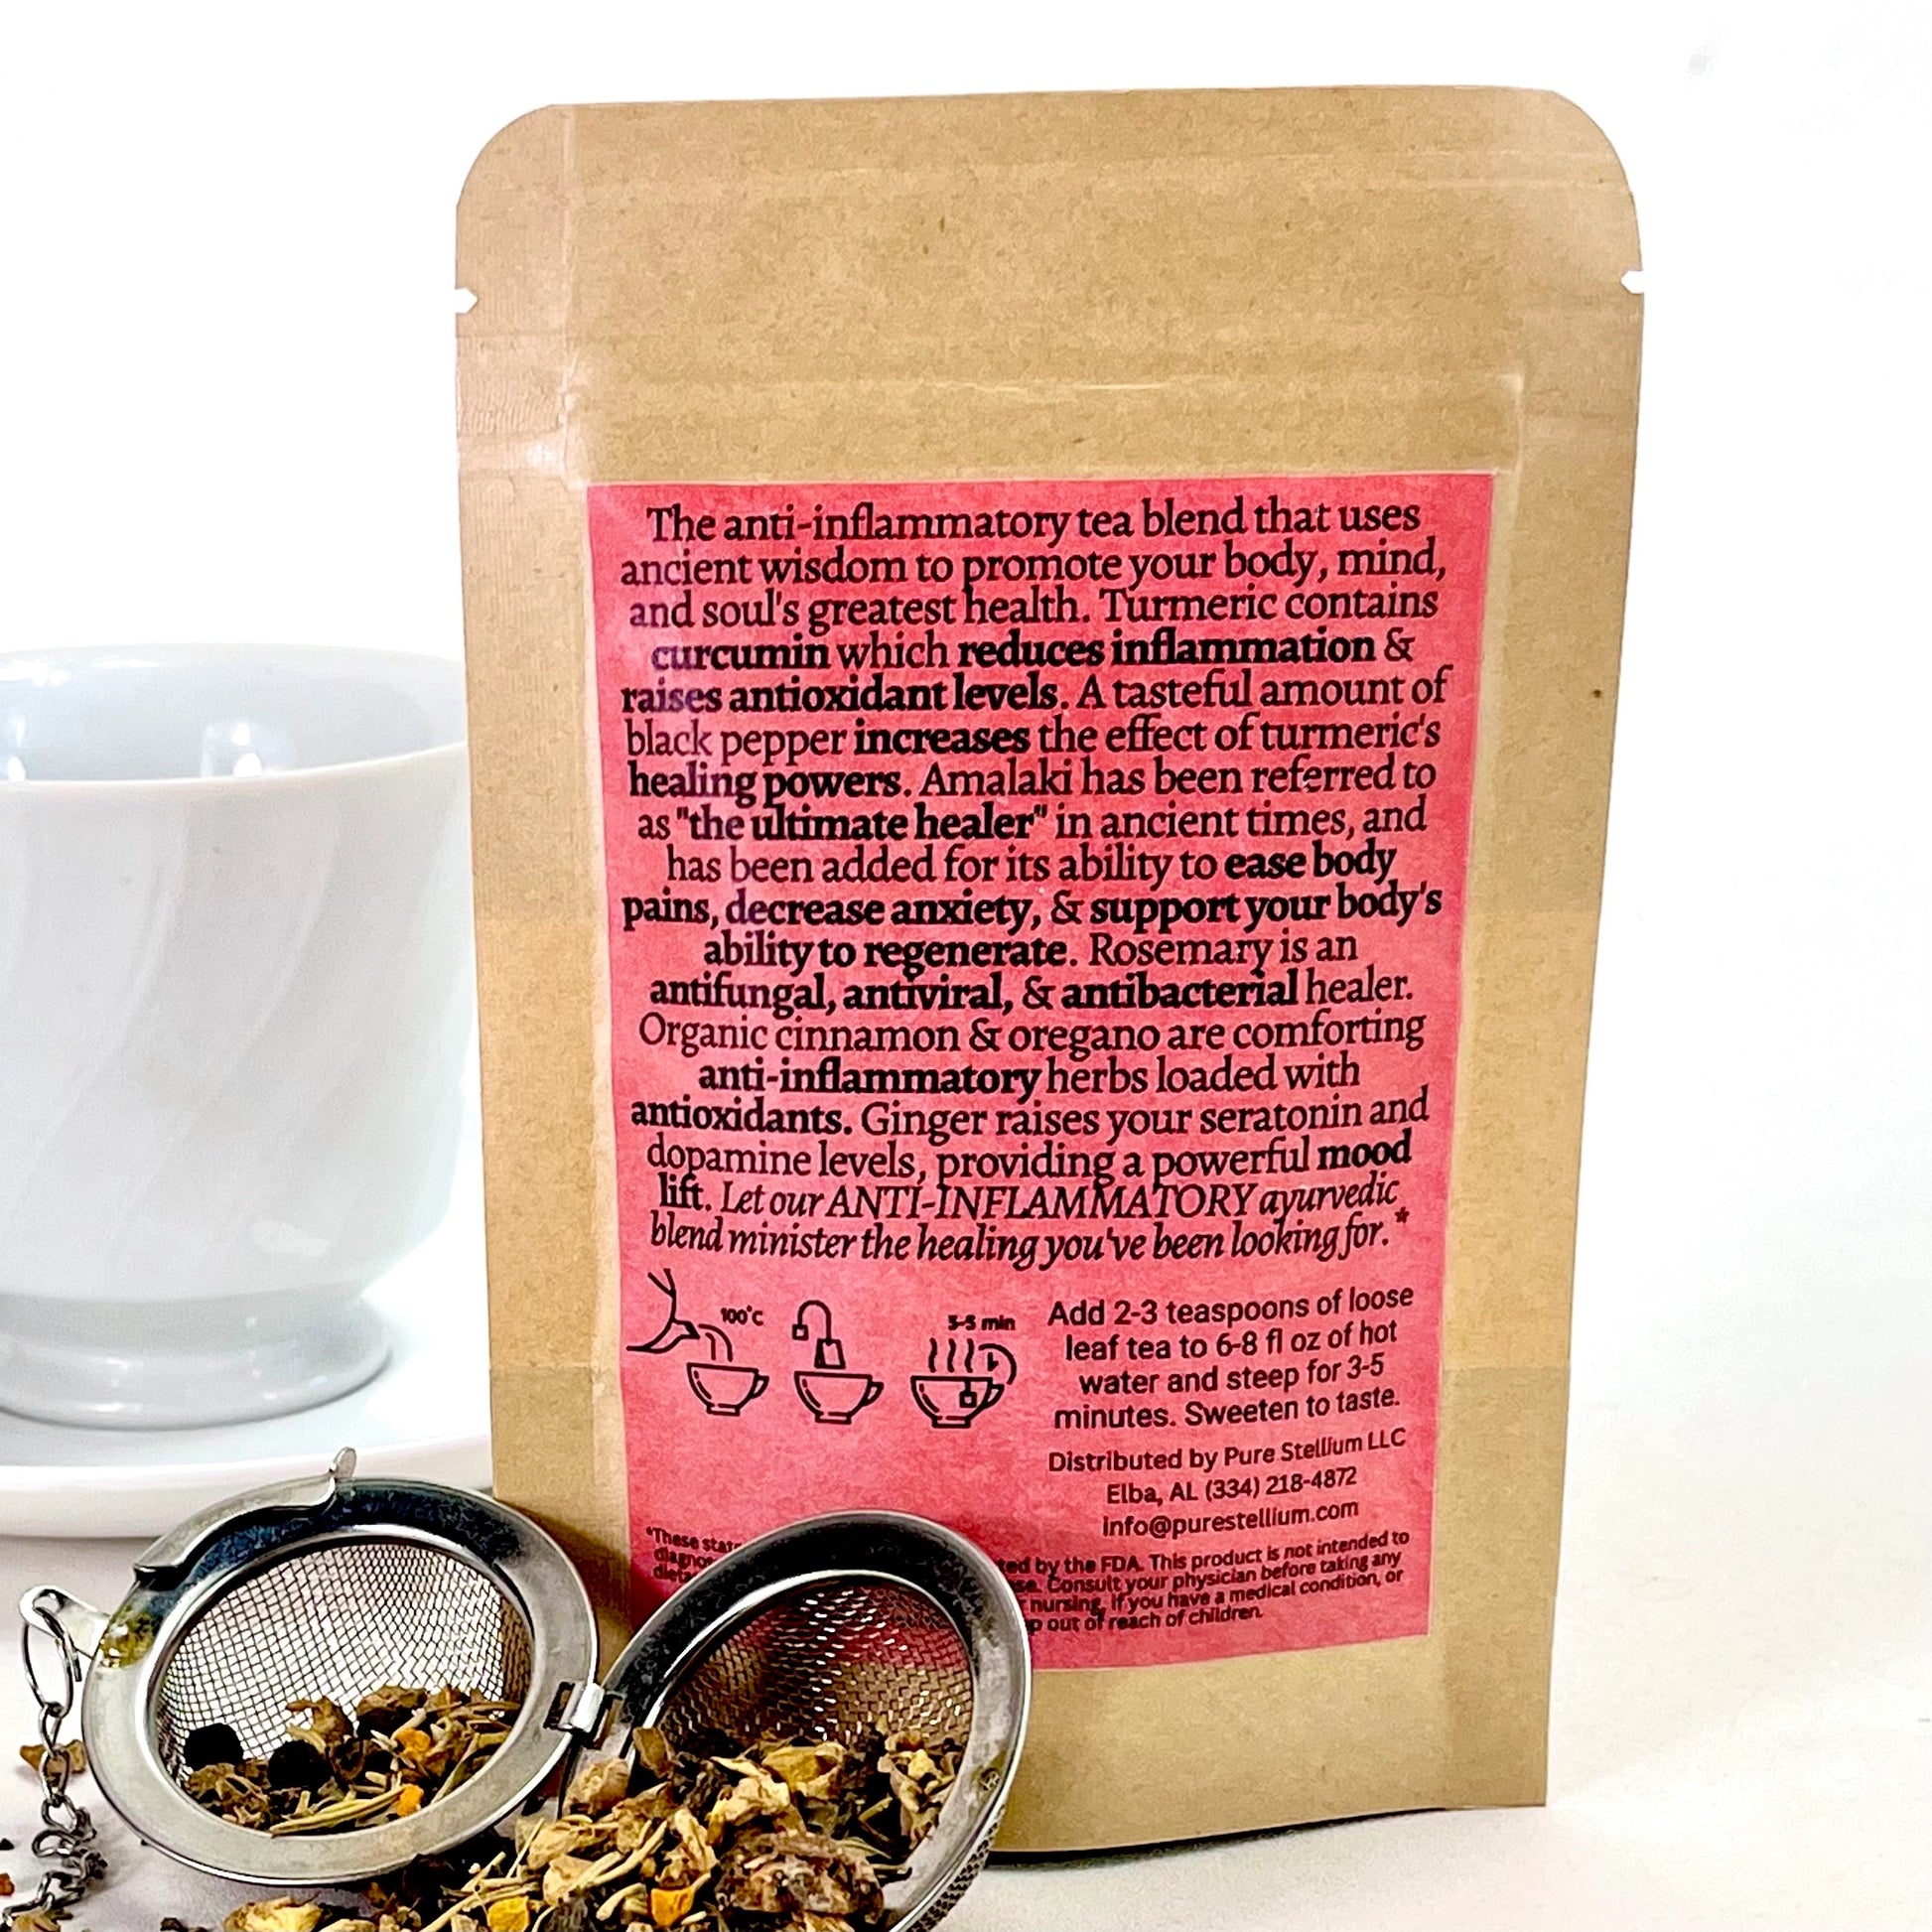 The package of an Elemental Life Product's anti-inflammatory loose leaf tea product with raw ingredients and a tea ball